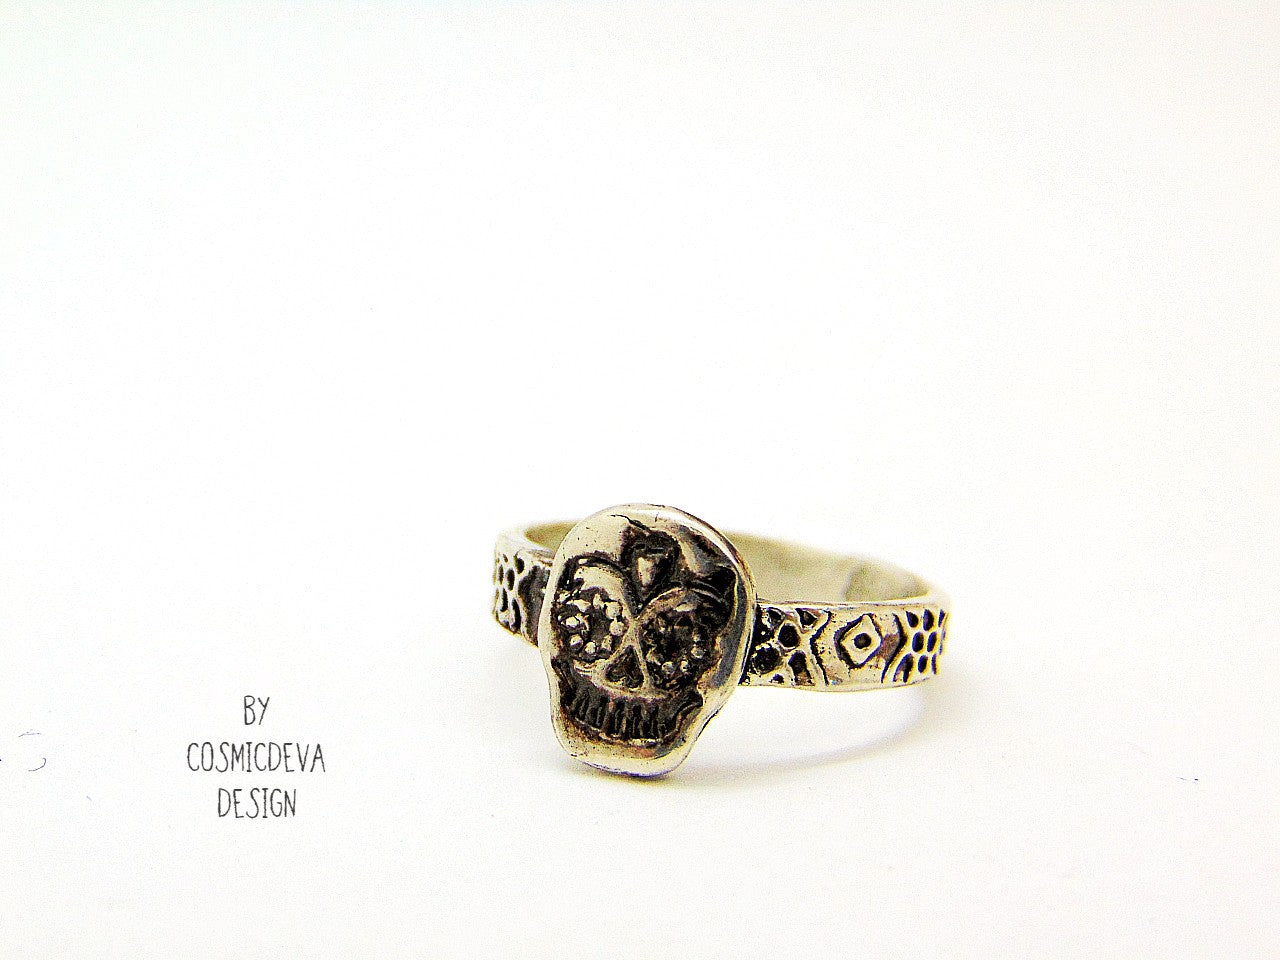 Handmade cute dainty sugar scull sterling silver ring. The inside of the ring has a polish with a few small irregularities from the forming process. The sterling silver sugar scull ring has been oxidized. The sugar skull is the predominant symbol of the "Day of the Dead", or Día de Los Muertos in Mexican culture. 